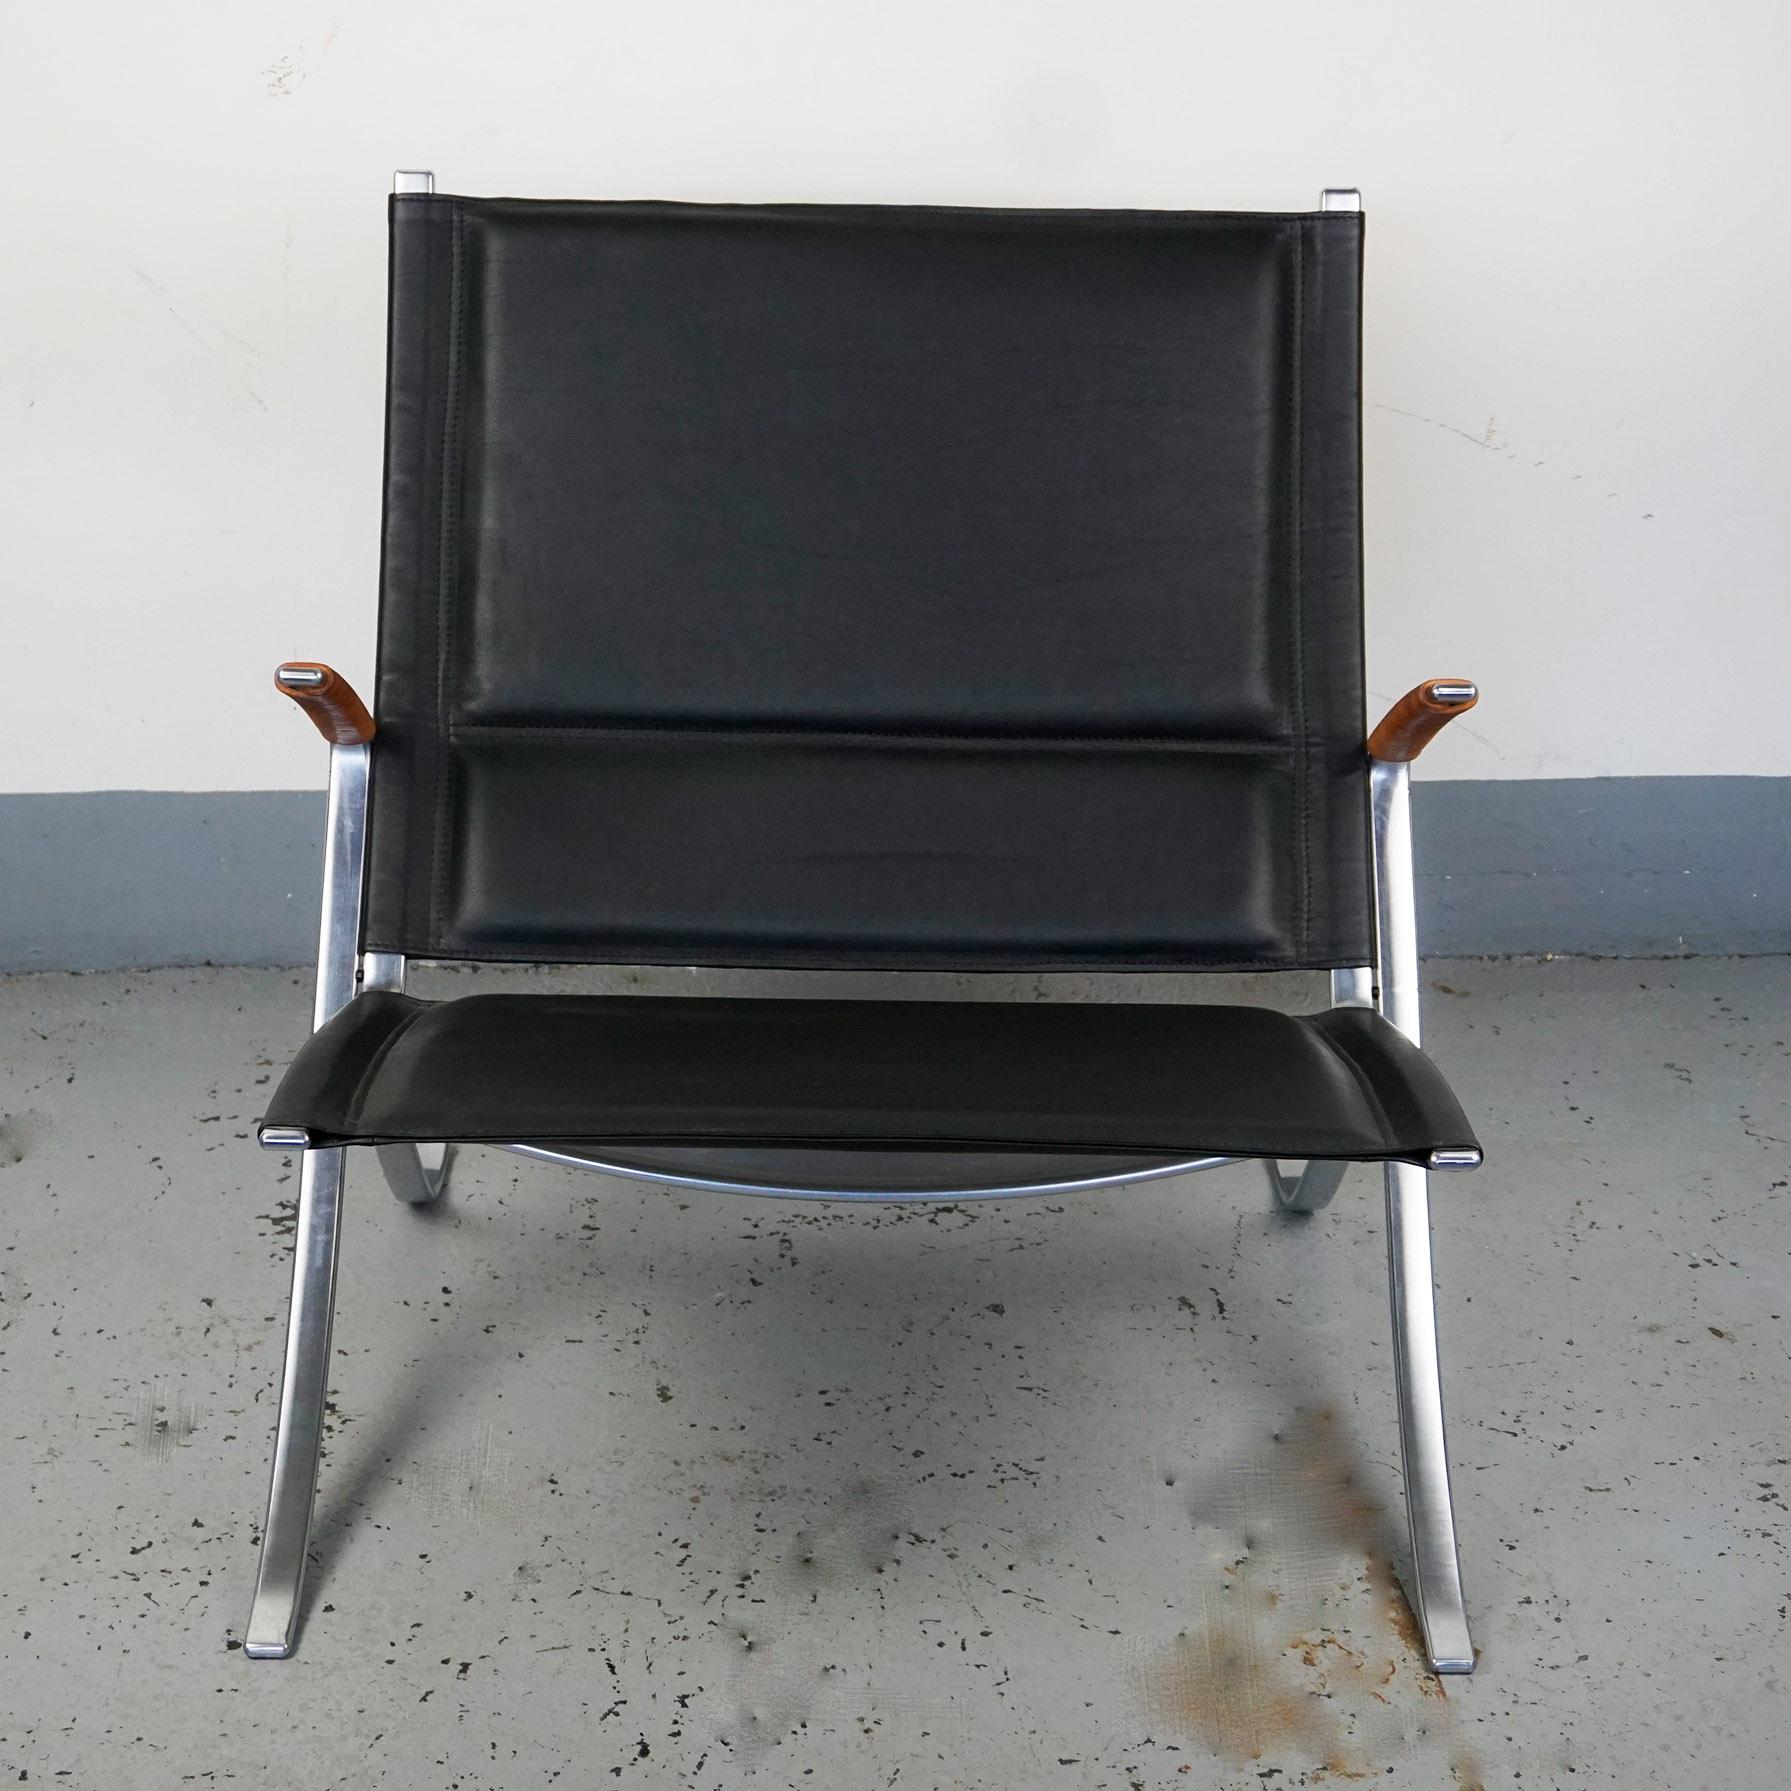 Iconic Scandinavian design, produced circa 1990s by Lange Production Denmark, Mod. FK 82.
The two X Chairs have a steel frame, black leather seats and armrests with brown leather.
As the chairs have been on storage for years and have never been used